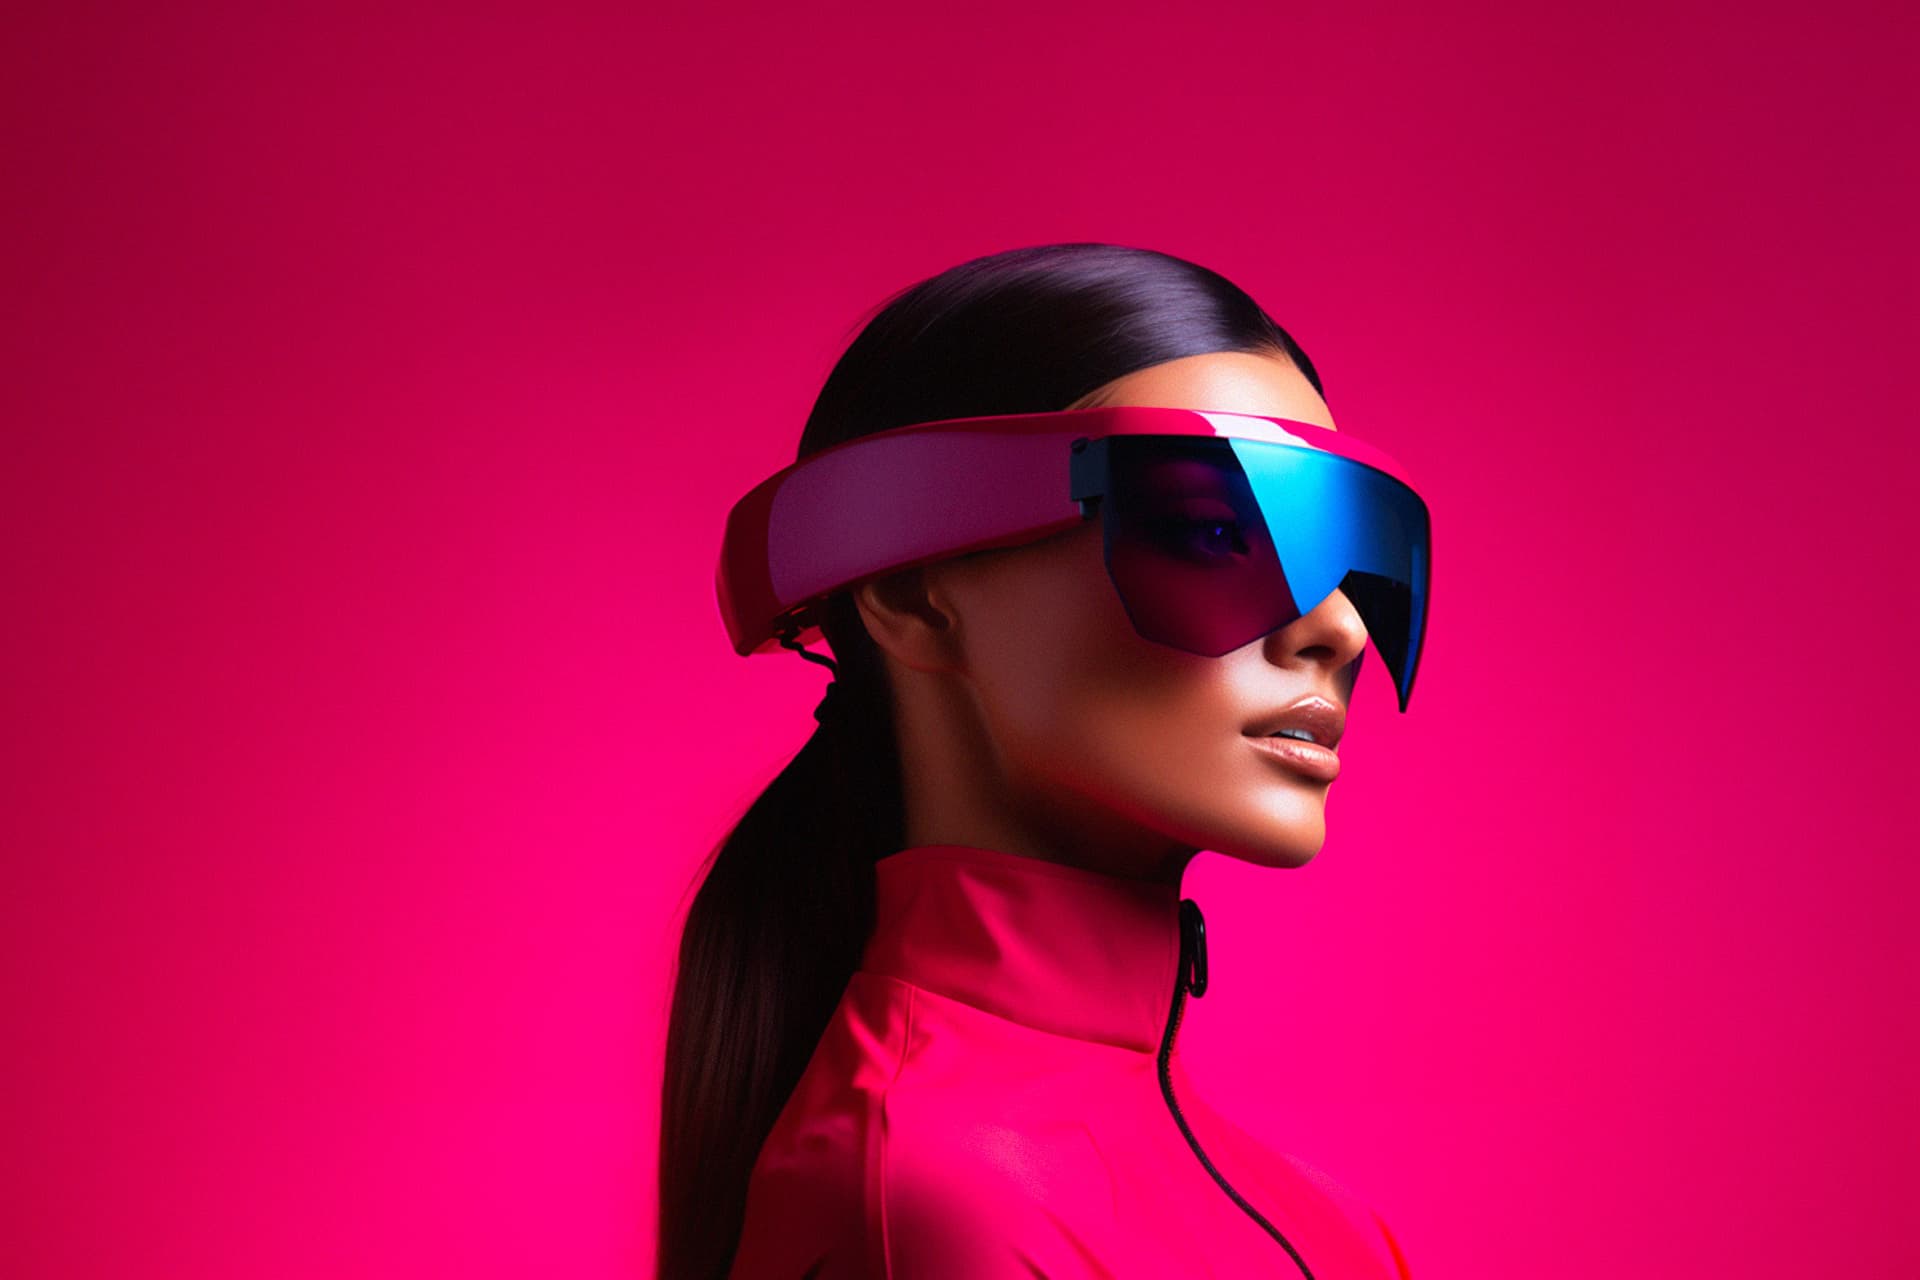 Women with dark hair in low ponytail wearing magenta turtleneck and futuristic VR headset